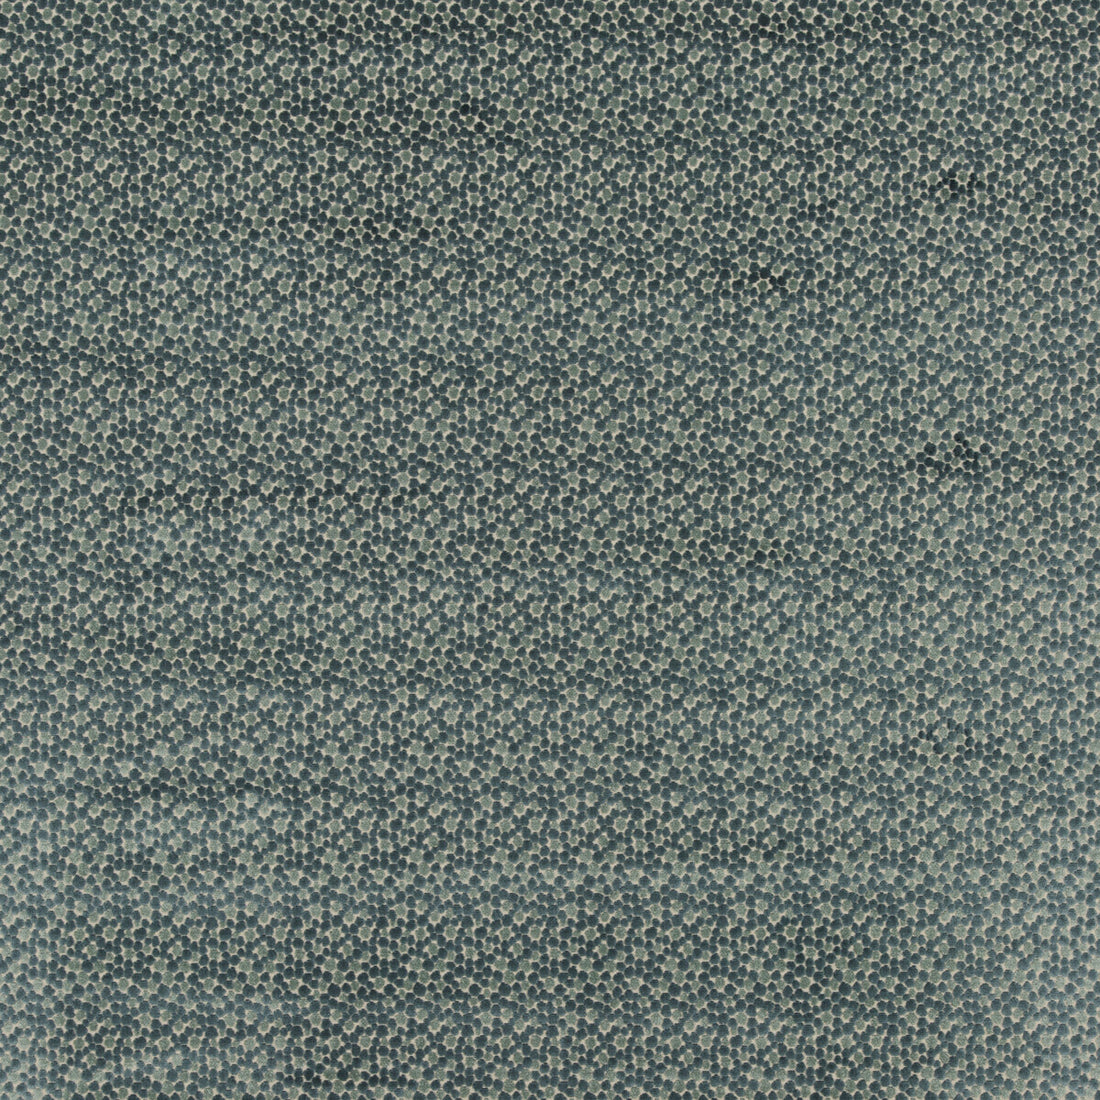 Salsa Two Spot fabric in teal color - pattern PF50424.615.0 - by Baker Lifestyle in the Carnival collection